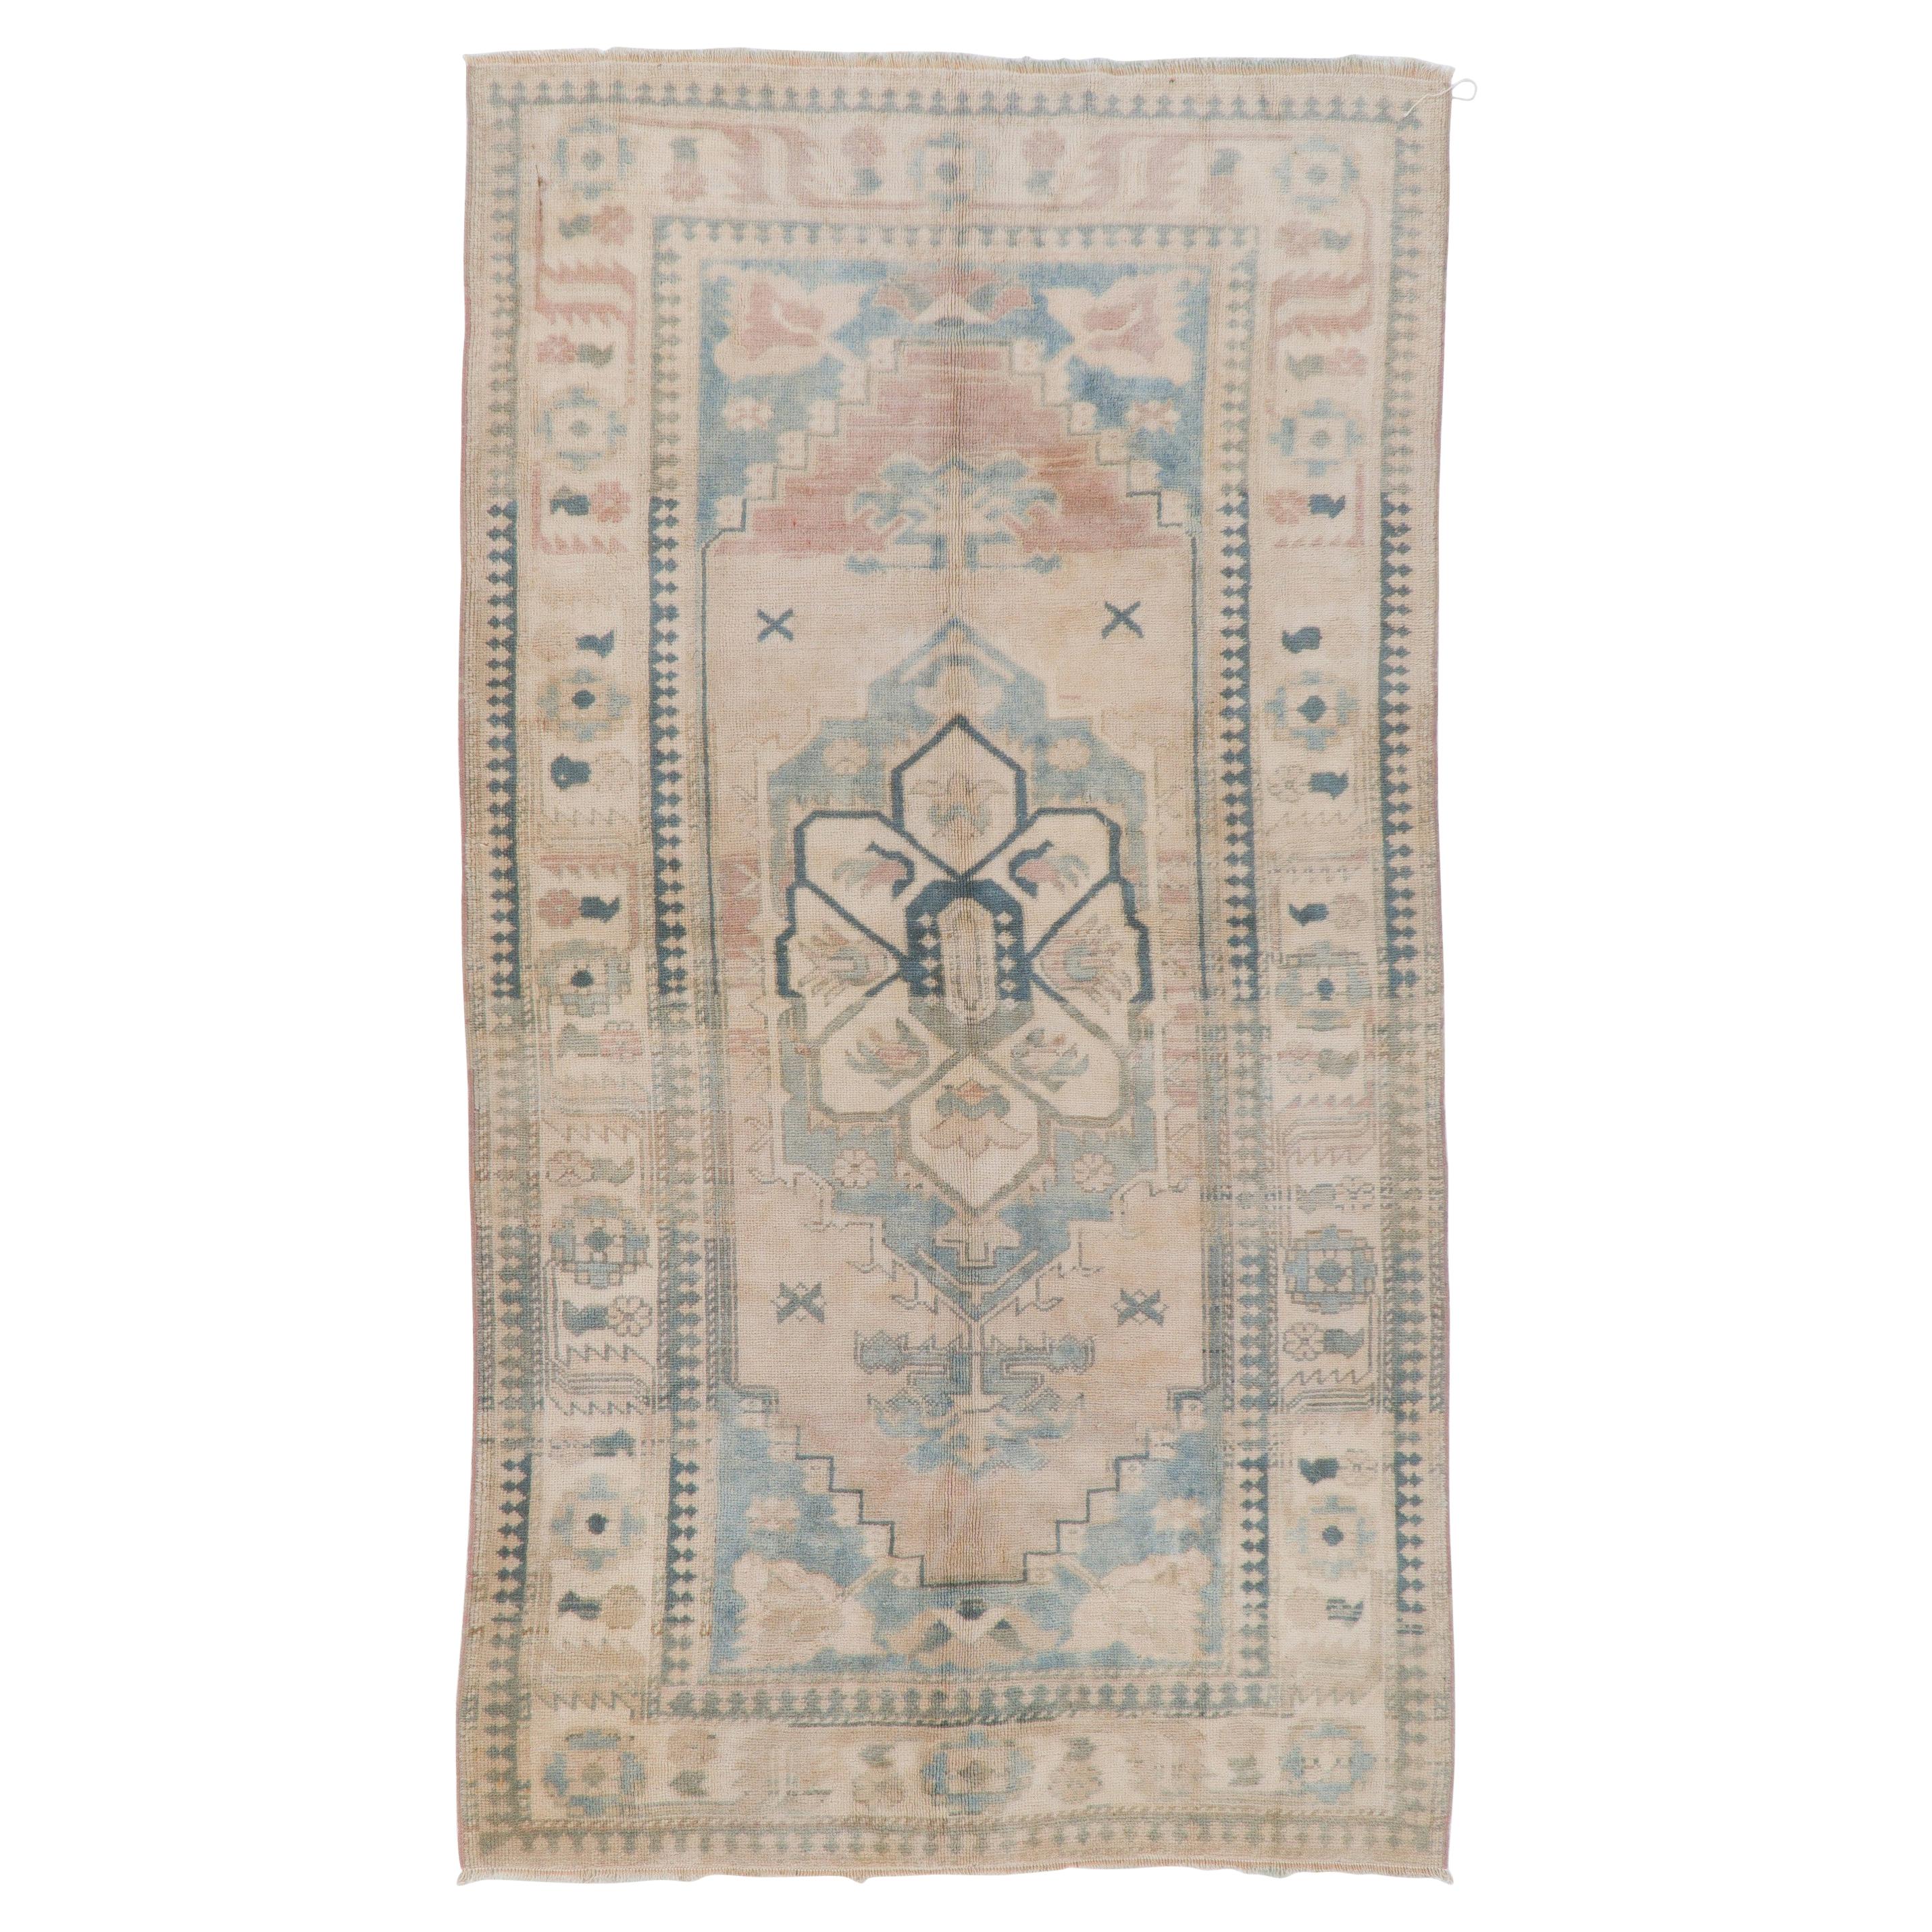 4.4x8 Ft Vintage Anatolian Oushak Rug with Wool Pile in Faded Pink and Blue